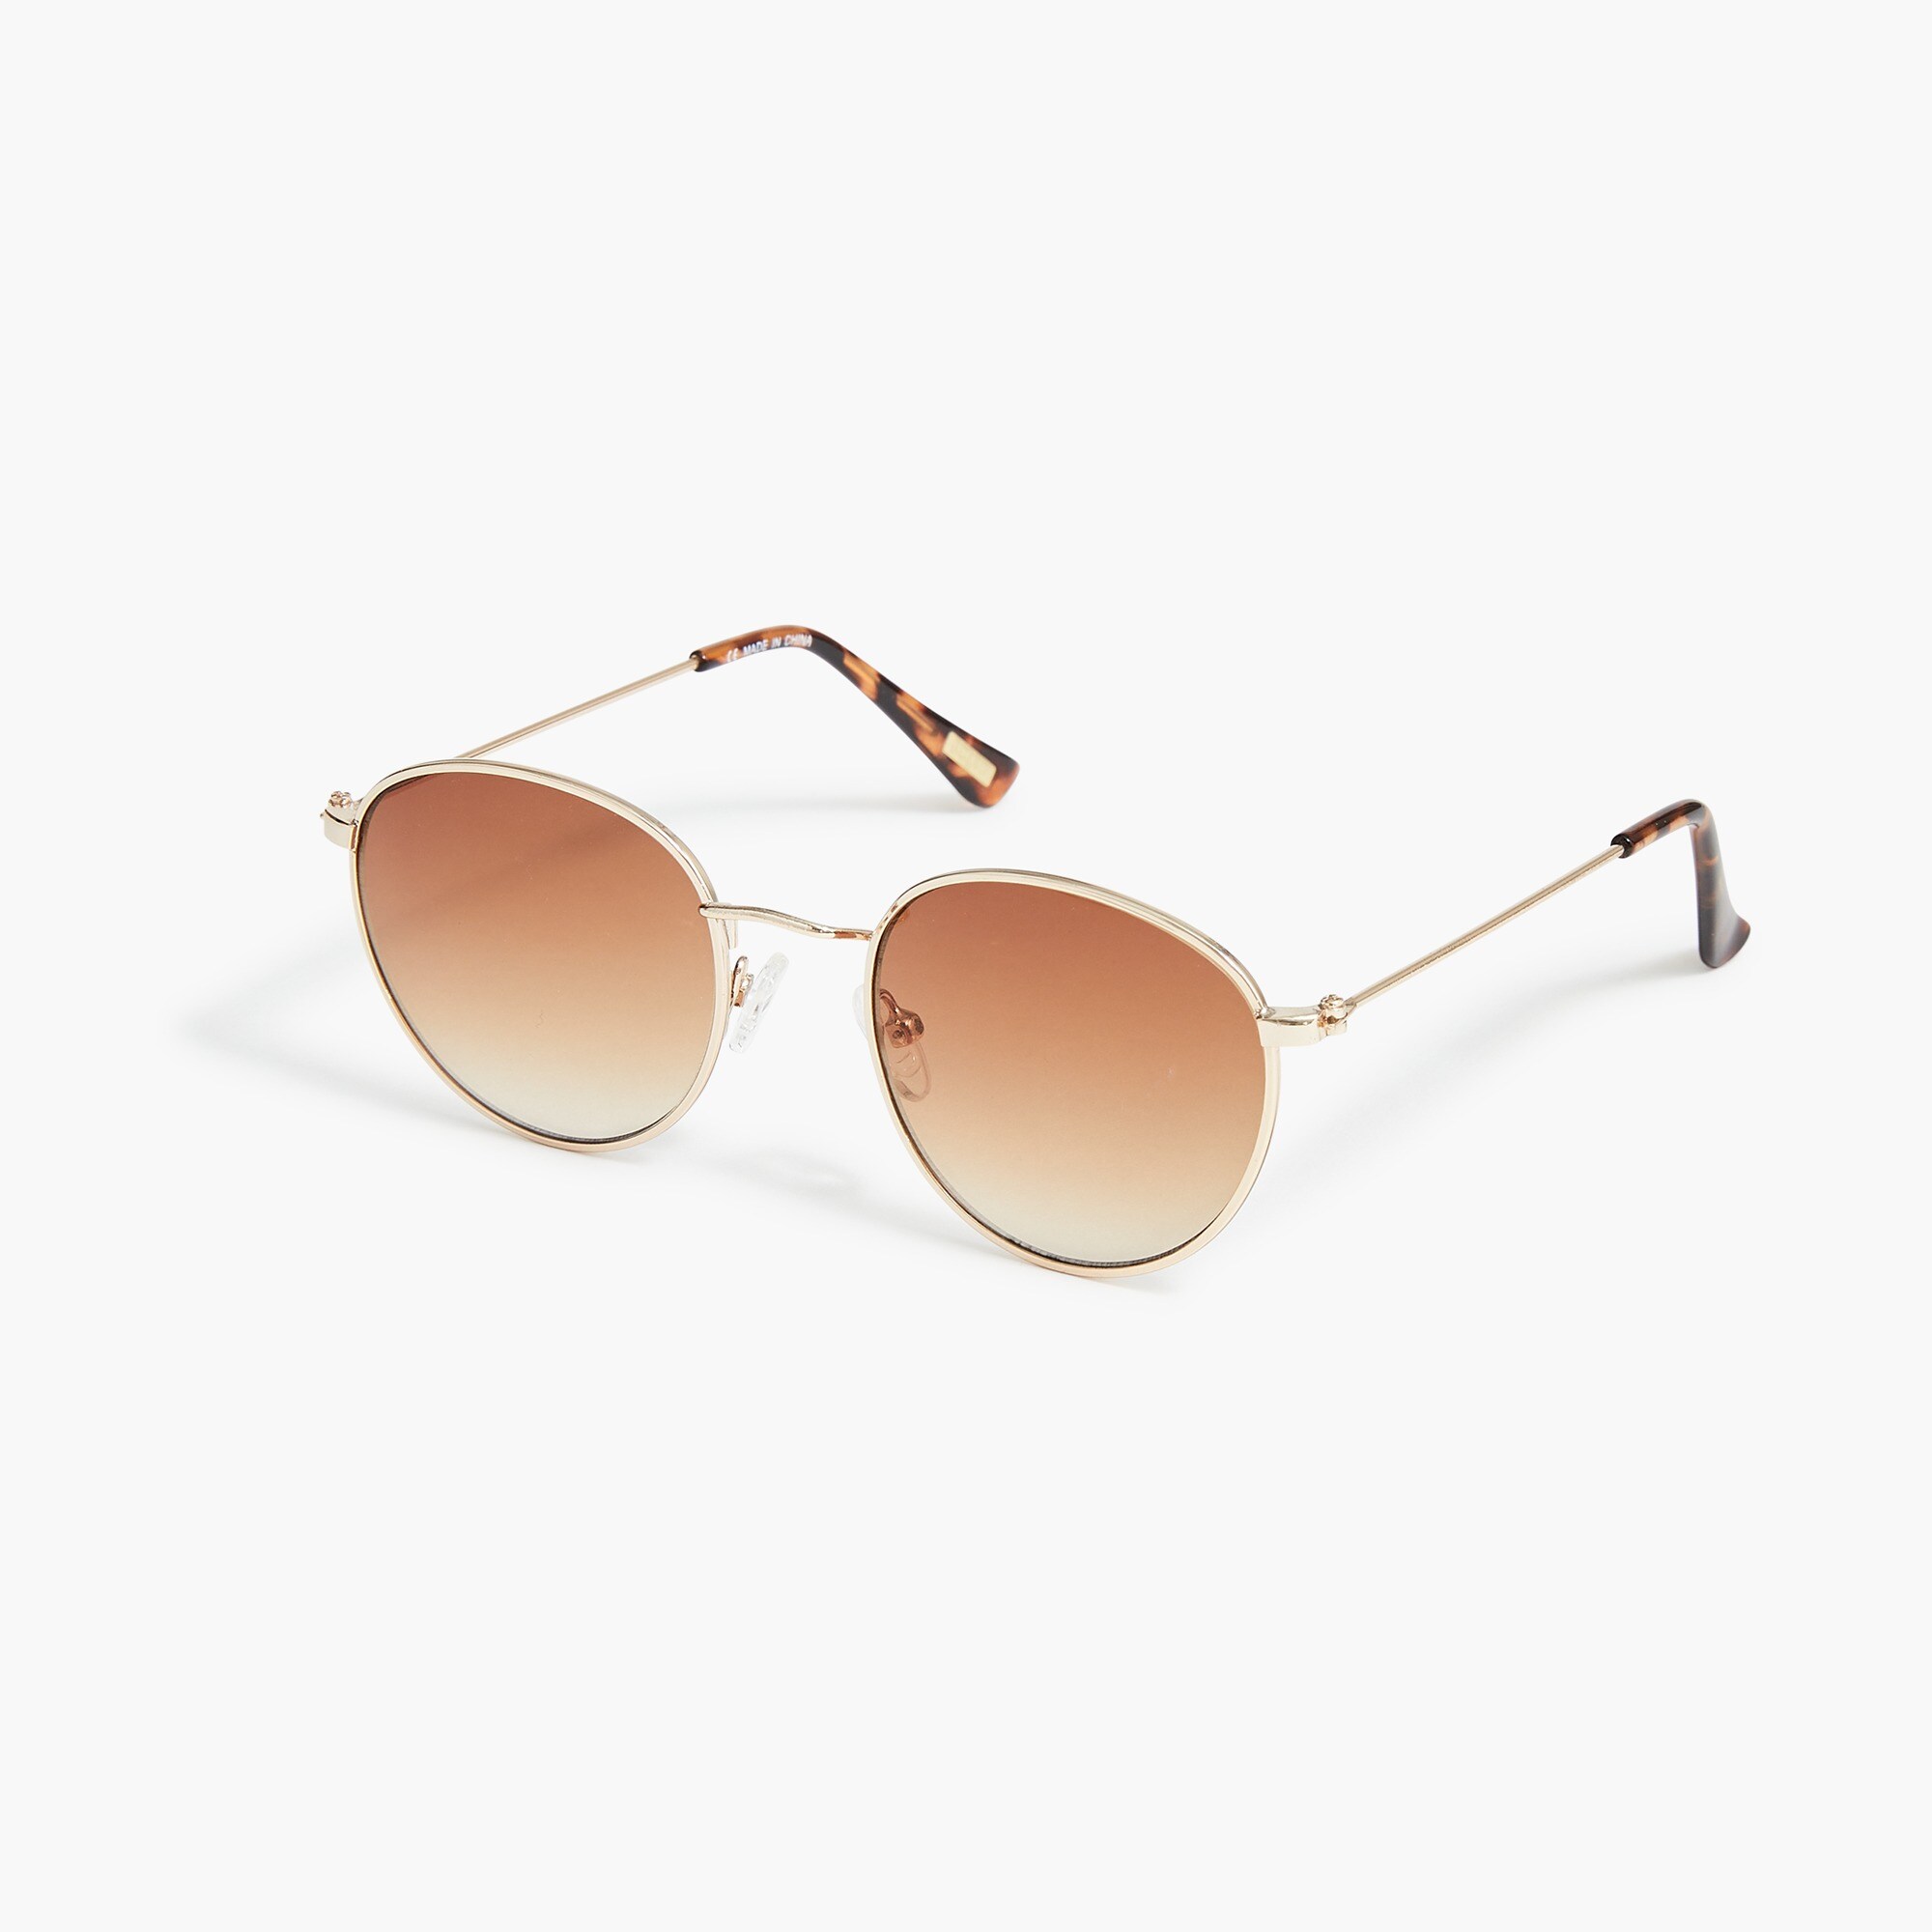  Rounded-frame metal sunglasses